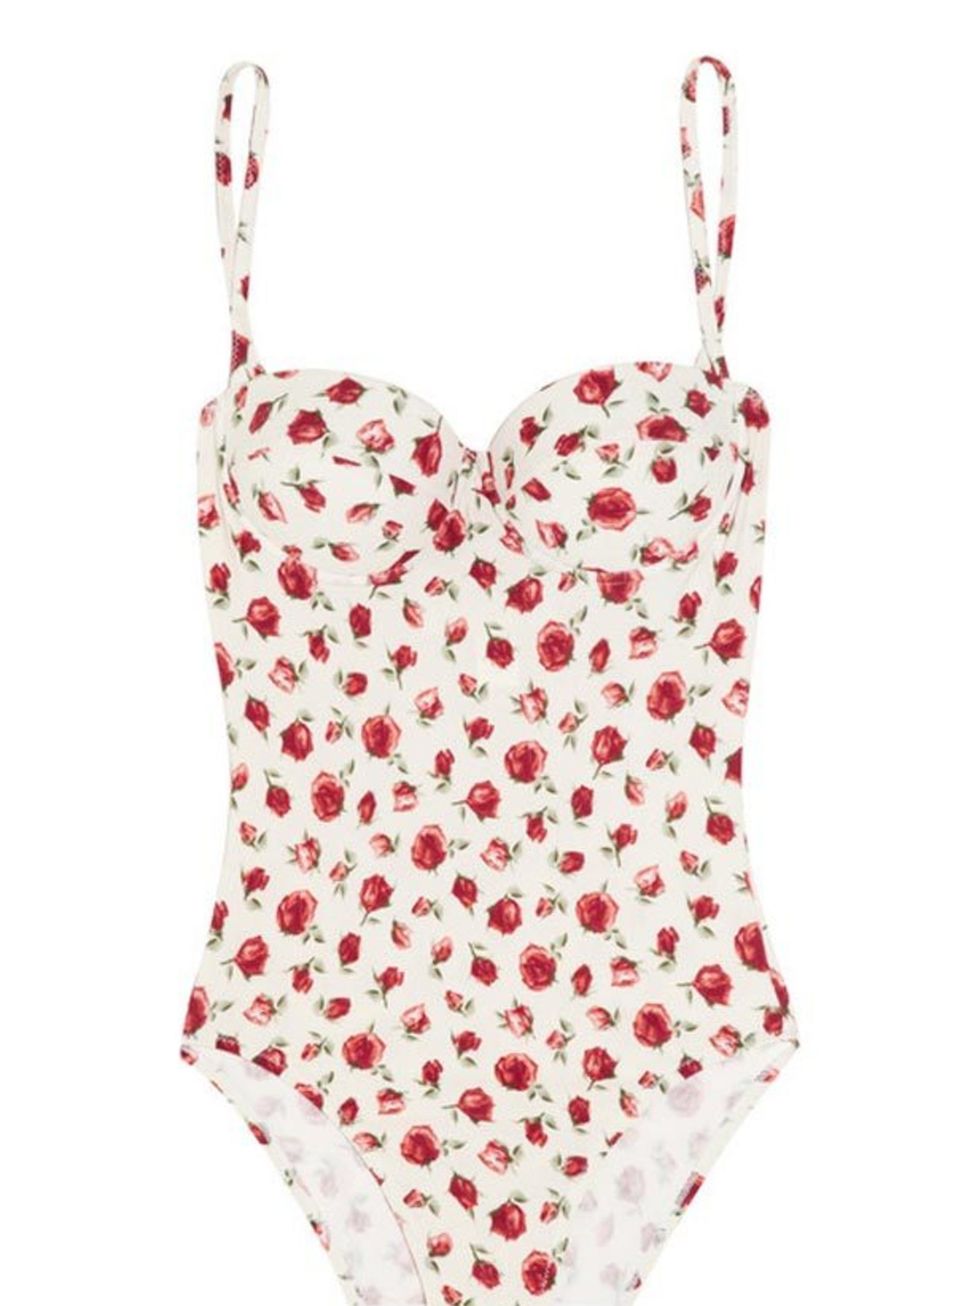 <p>Rosamosario floral swimsuit, £220, at <a href="http://www.net-a-porter.com/Shop/Designers/Rosamosario/All">Net-a-Porter</a></p>